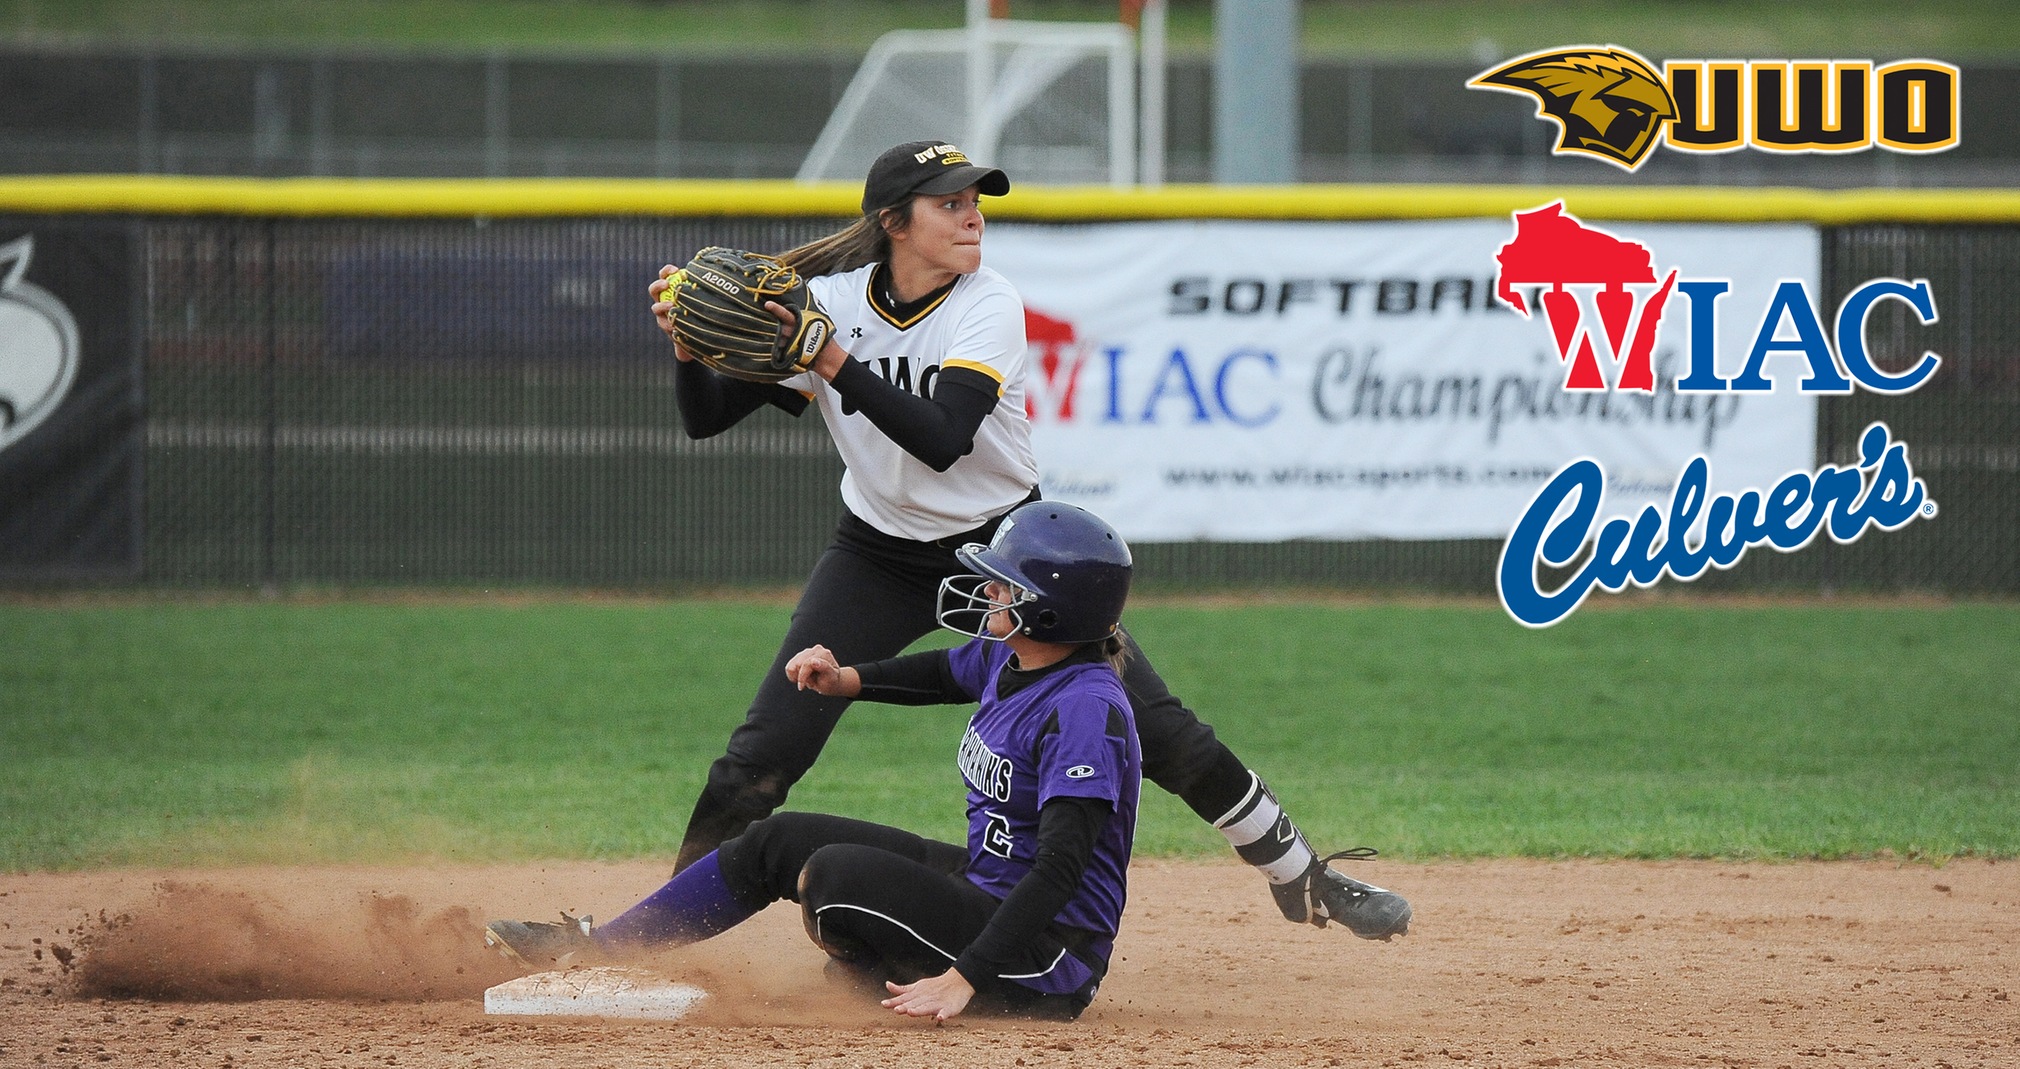 Natalie Dudek has started 130 of the 131 games that she has played for the Titans. Her career totals include a .324 batting average with six home runs and 67 runs batted in.